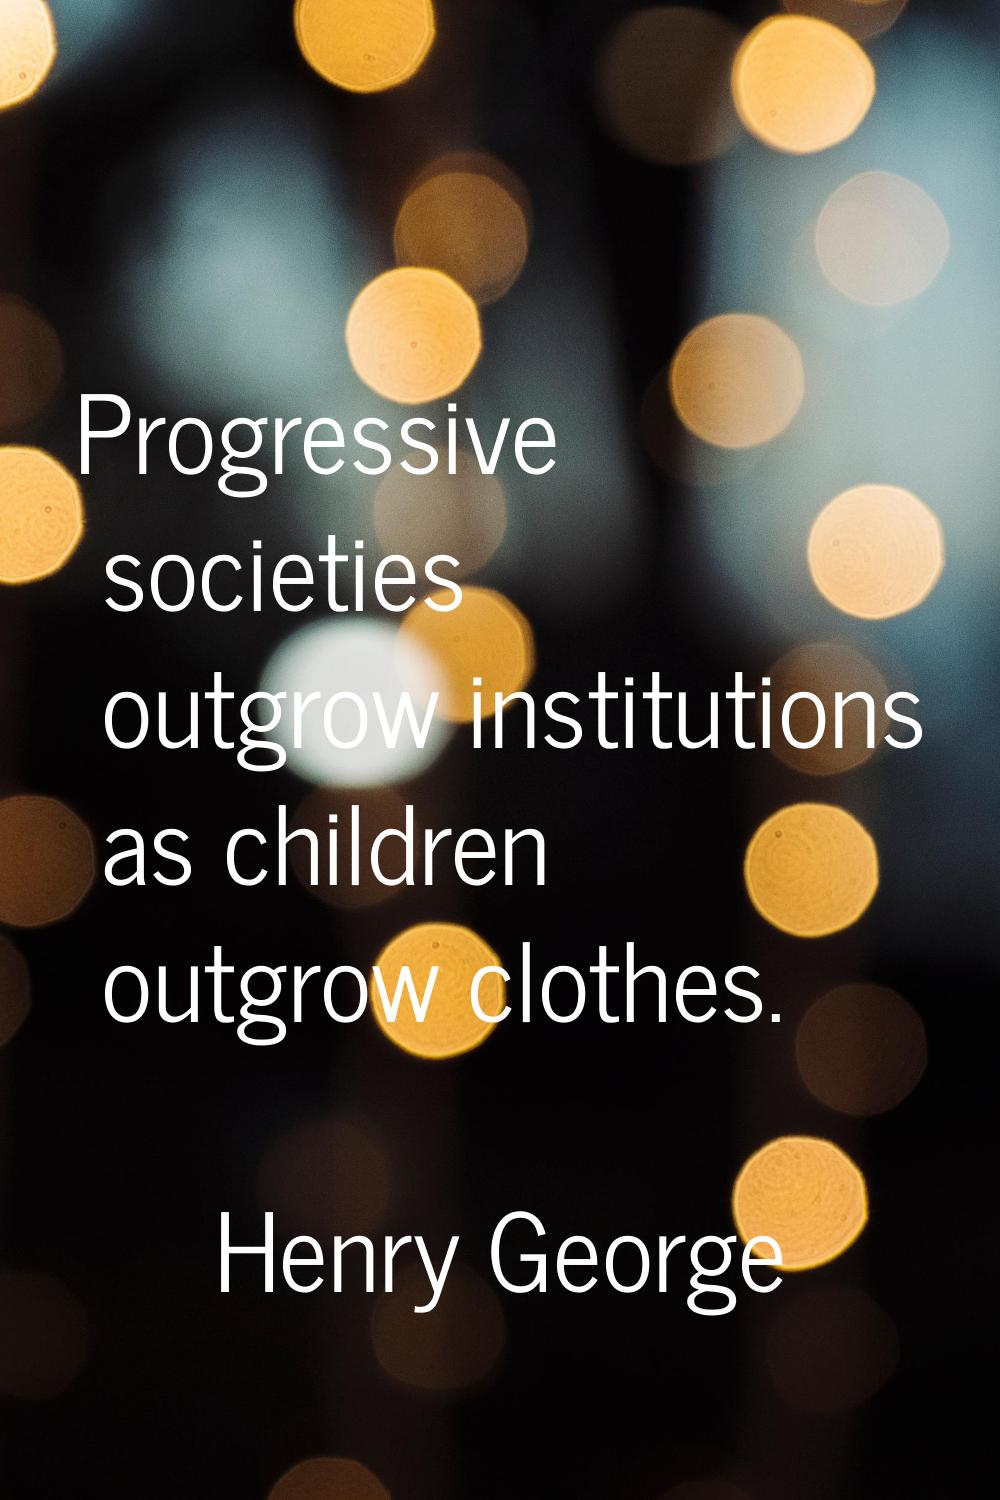 Progressive societies outgrow institutions as children outgrow clothes.